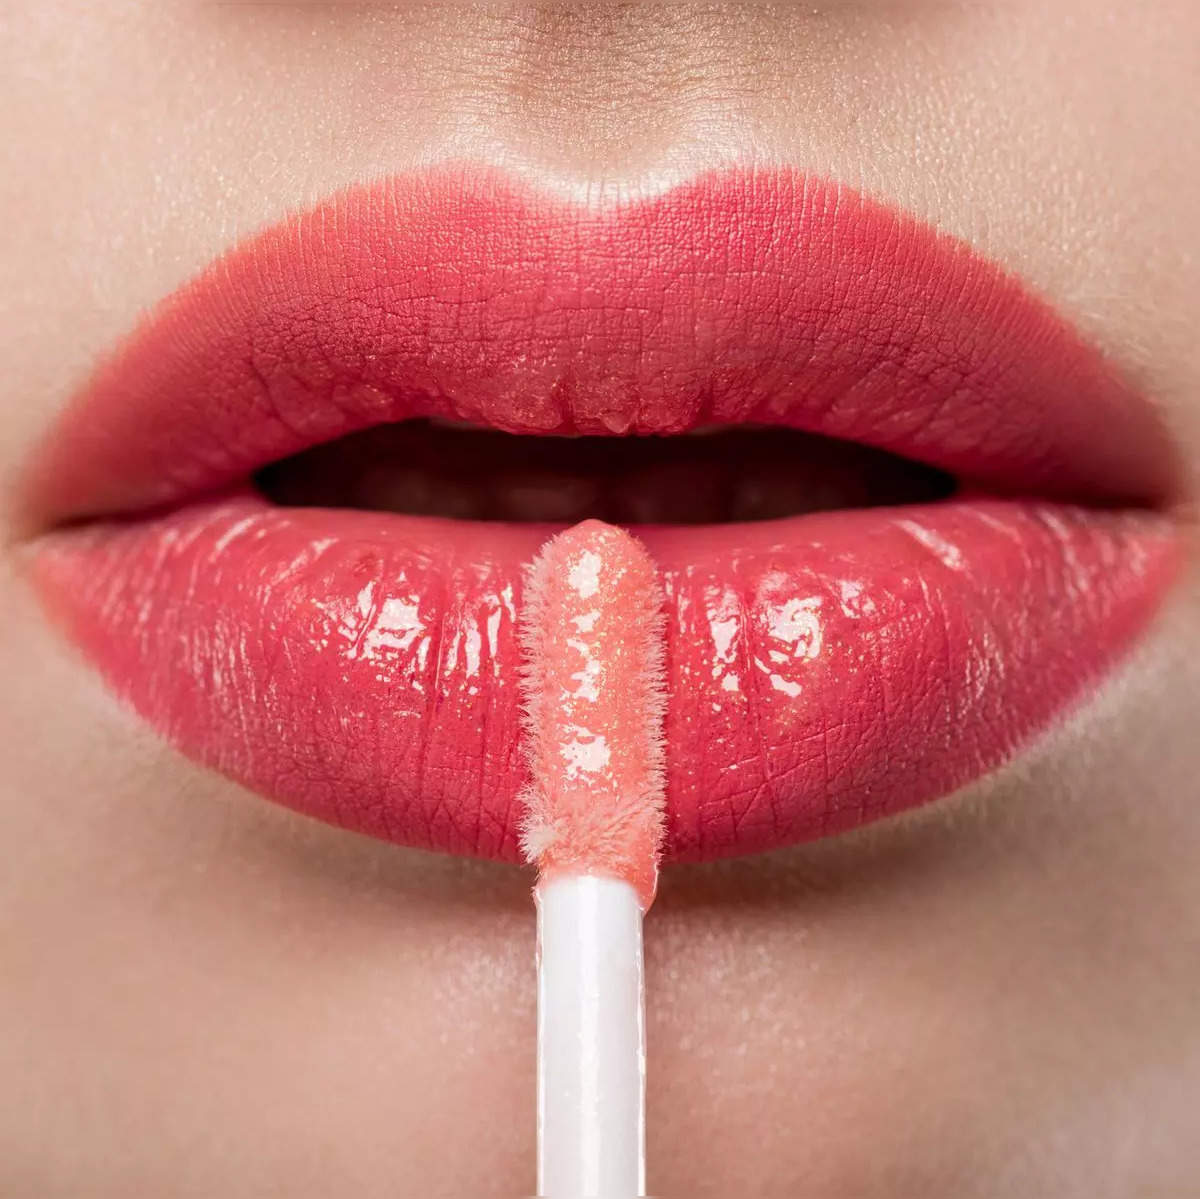 Glamorous Make Your Own Lip Gloss To Repair And Enhance Lips 